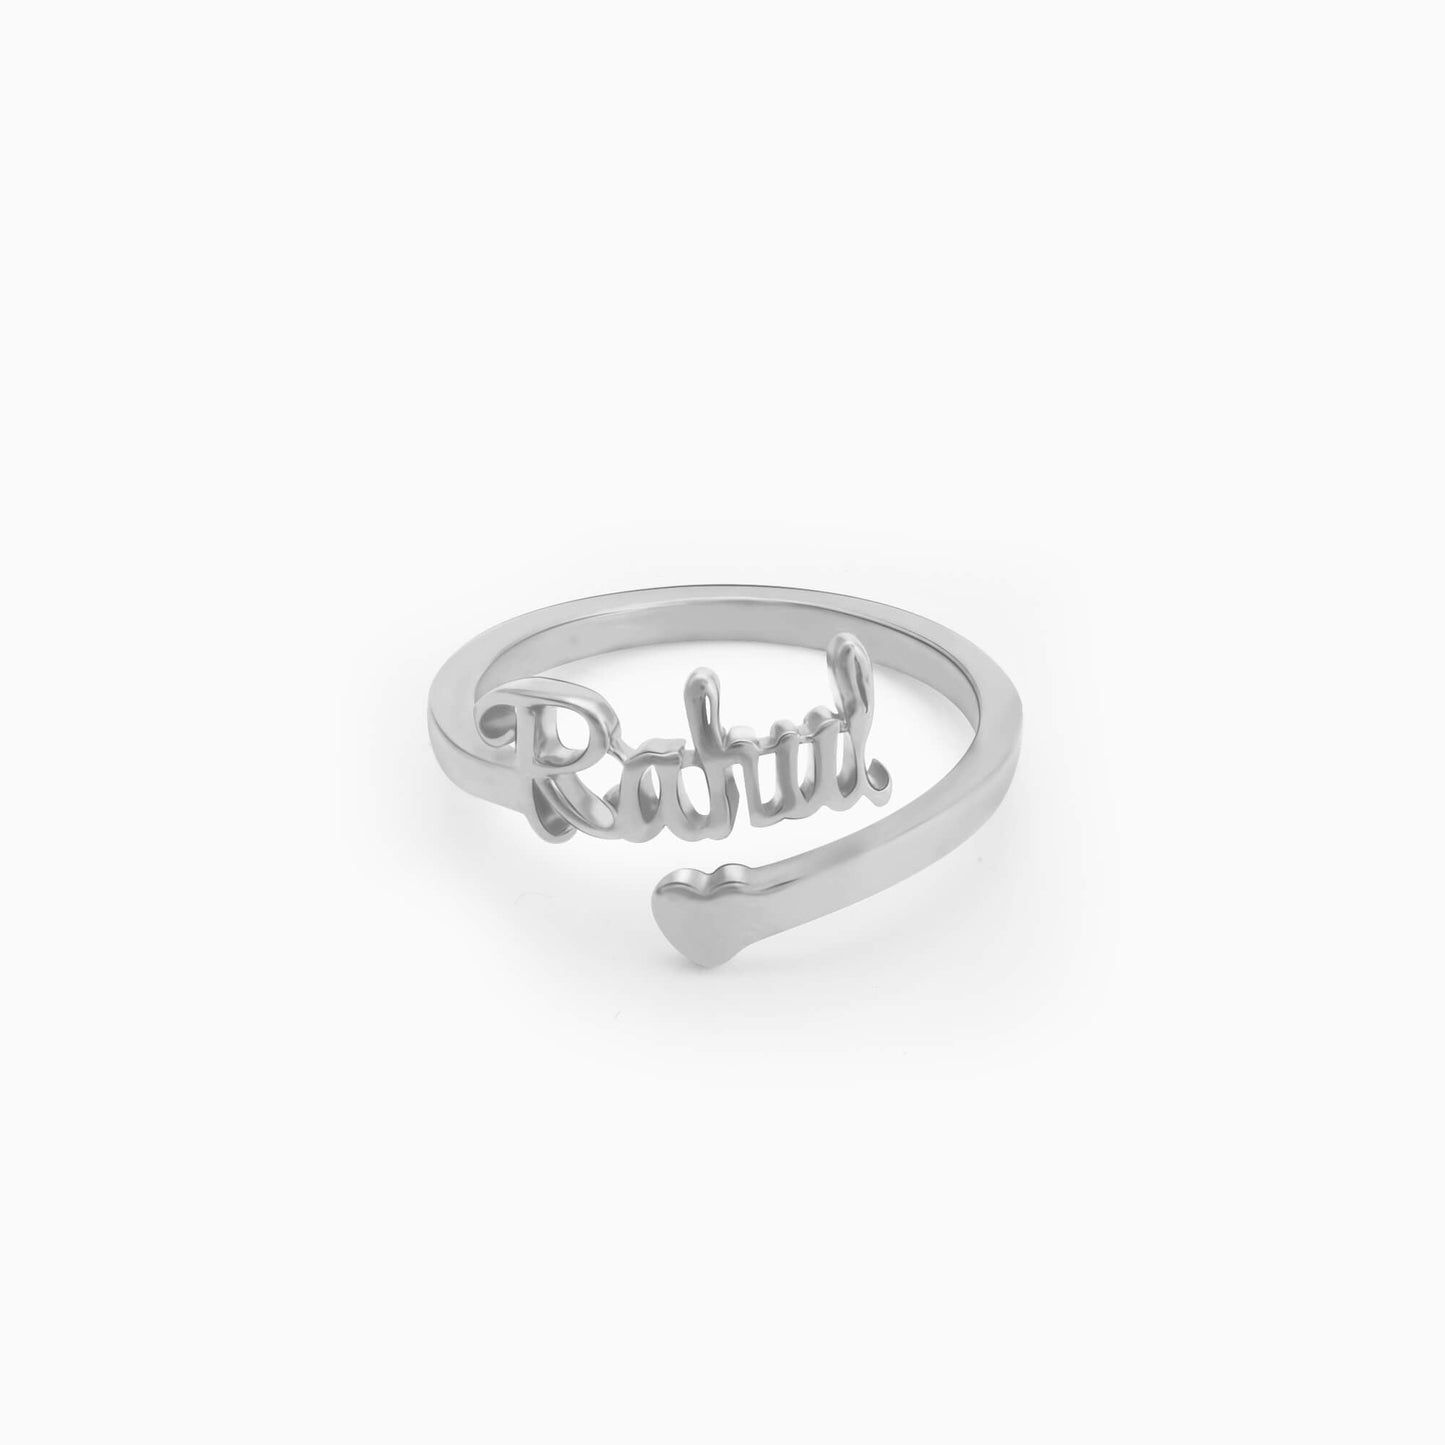 Personalised pure silver name ring